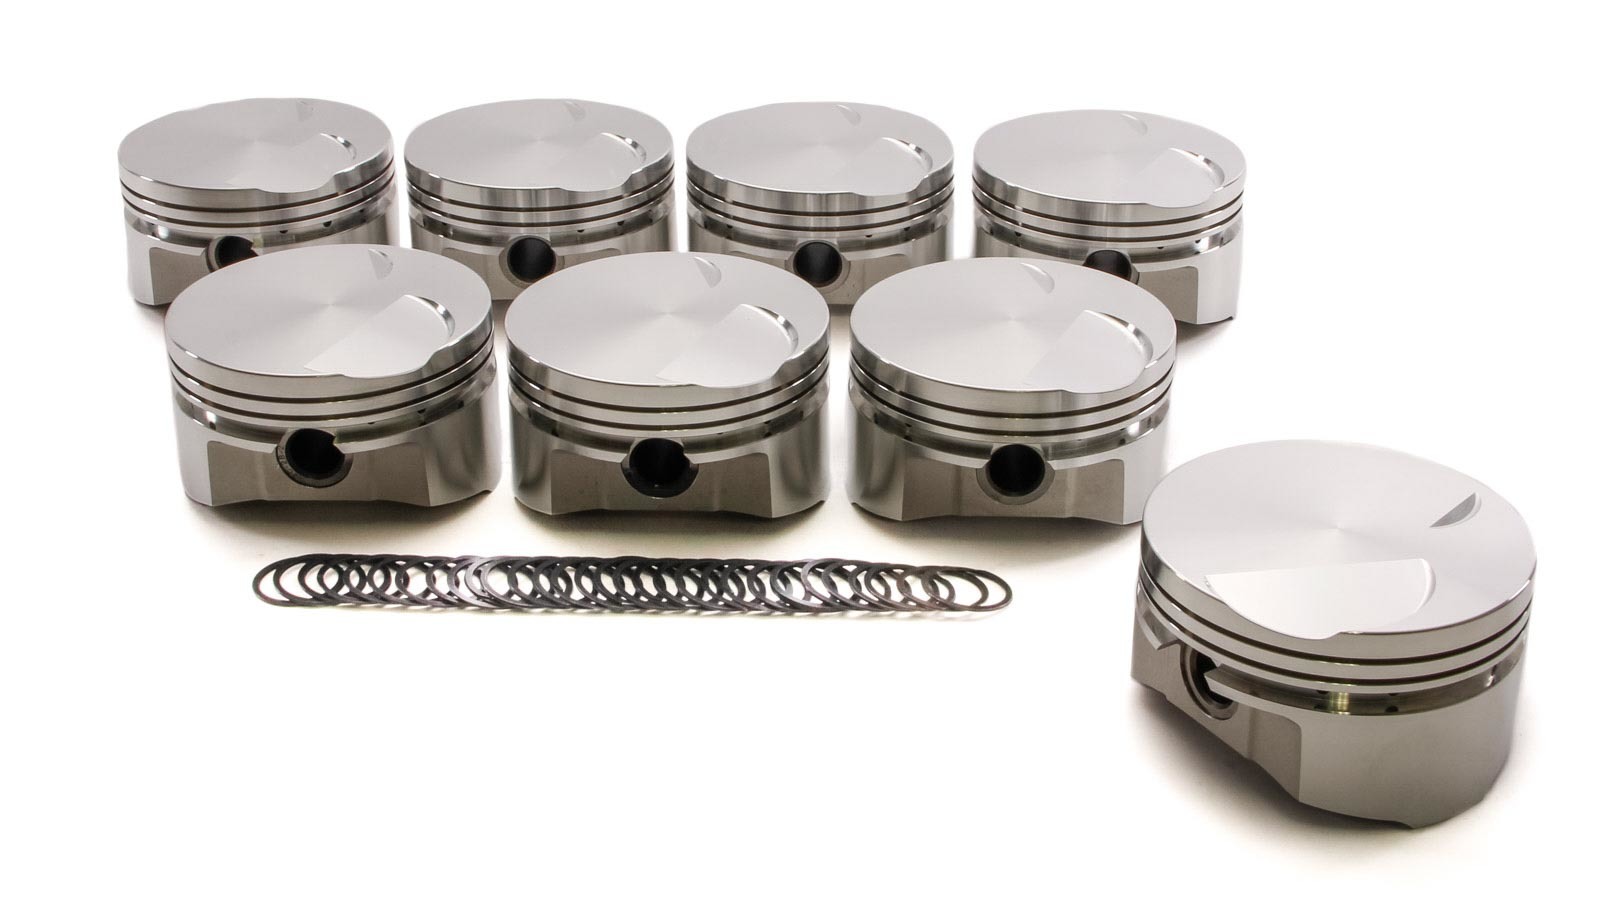 SRP Pistons 206069 Piston, 351 Cleveland Flat Top, Forged, 4.030 in Bore, 1/16 x 1/16 x 3/16 in Ring Grooves, Minus 3.00 cc, Ford Cleveland, Set of 8